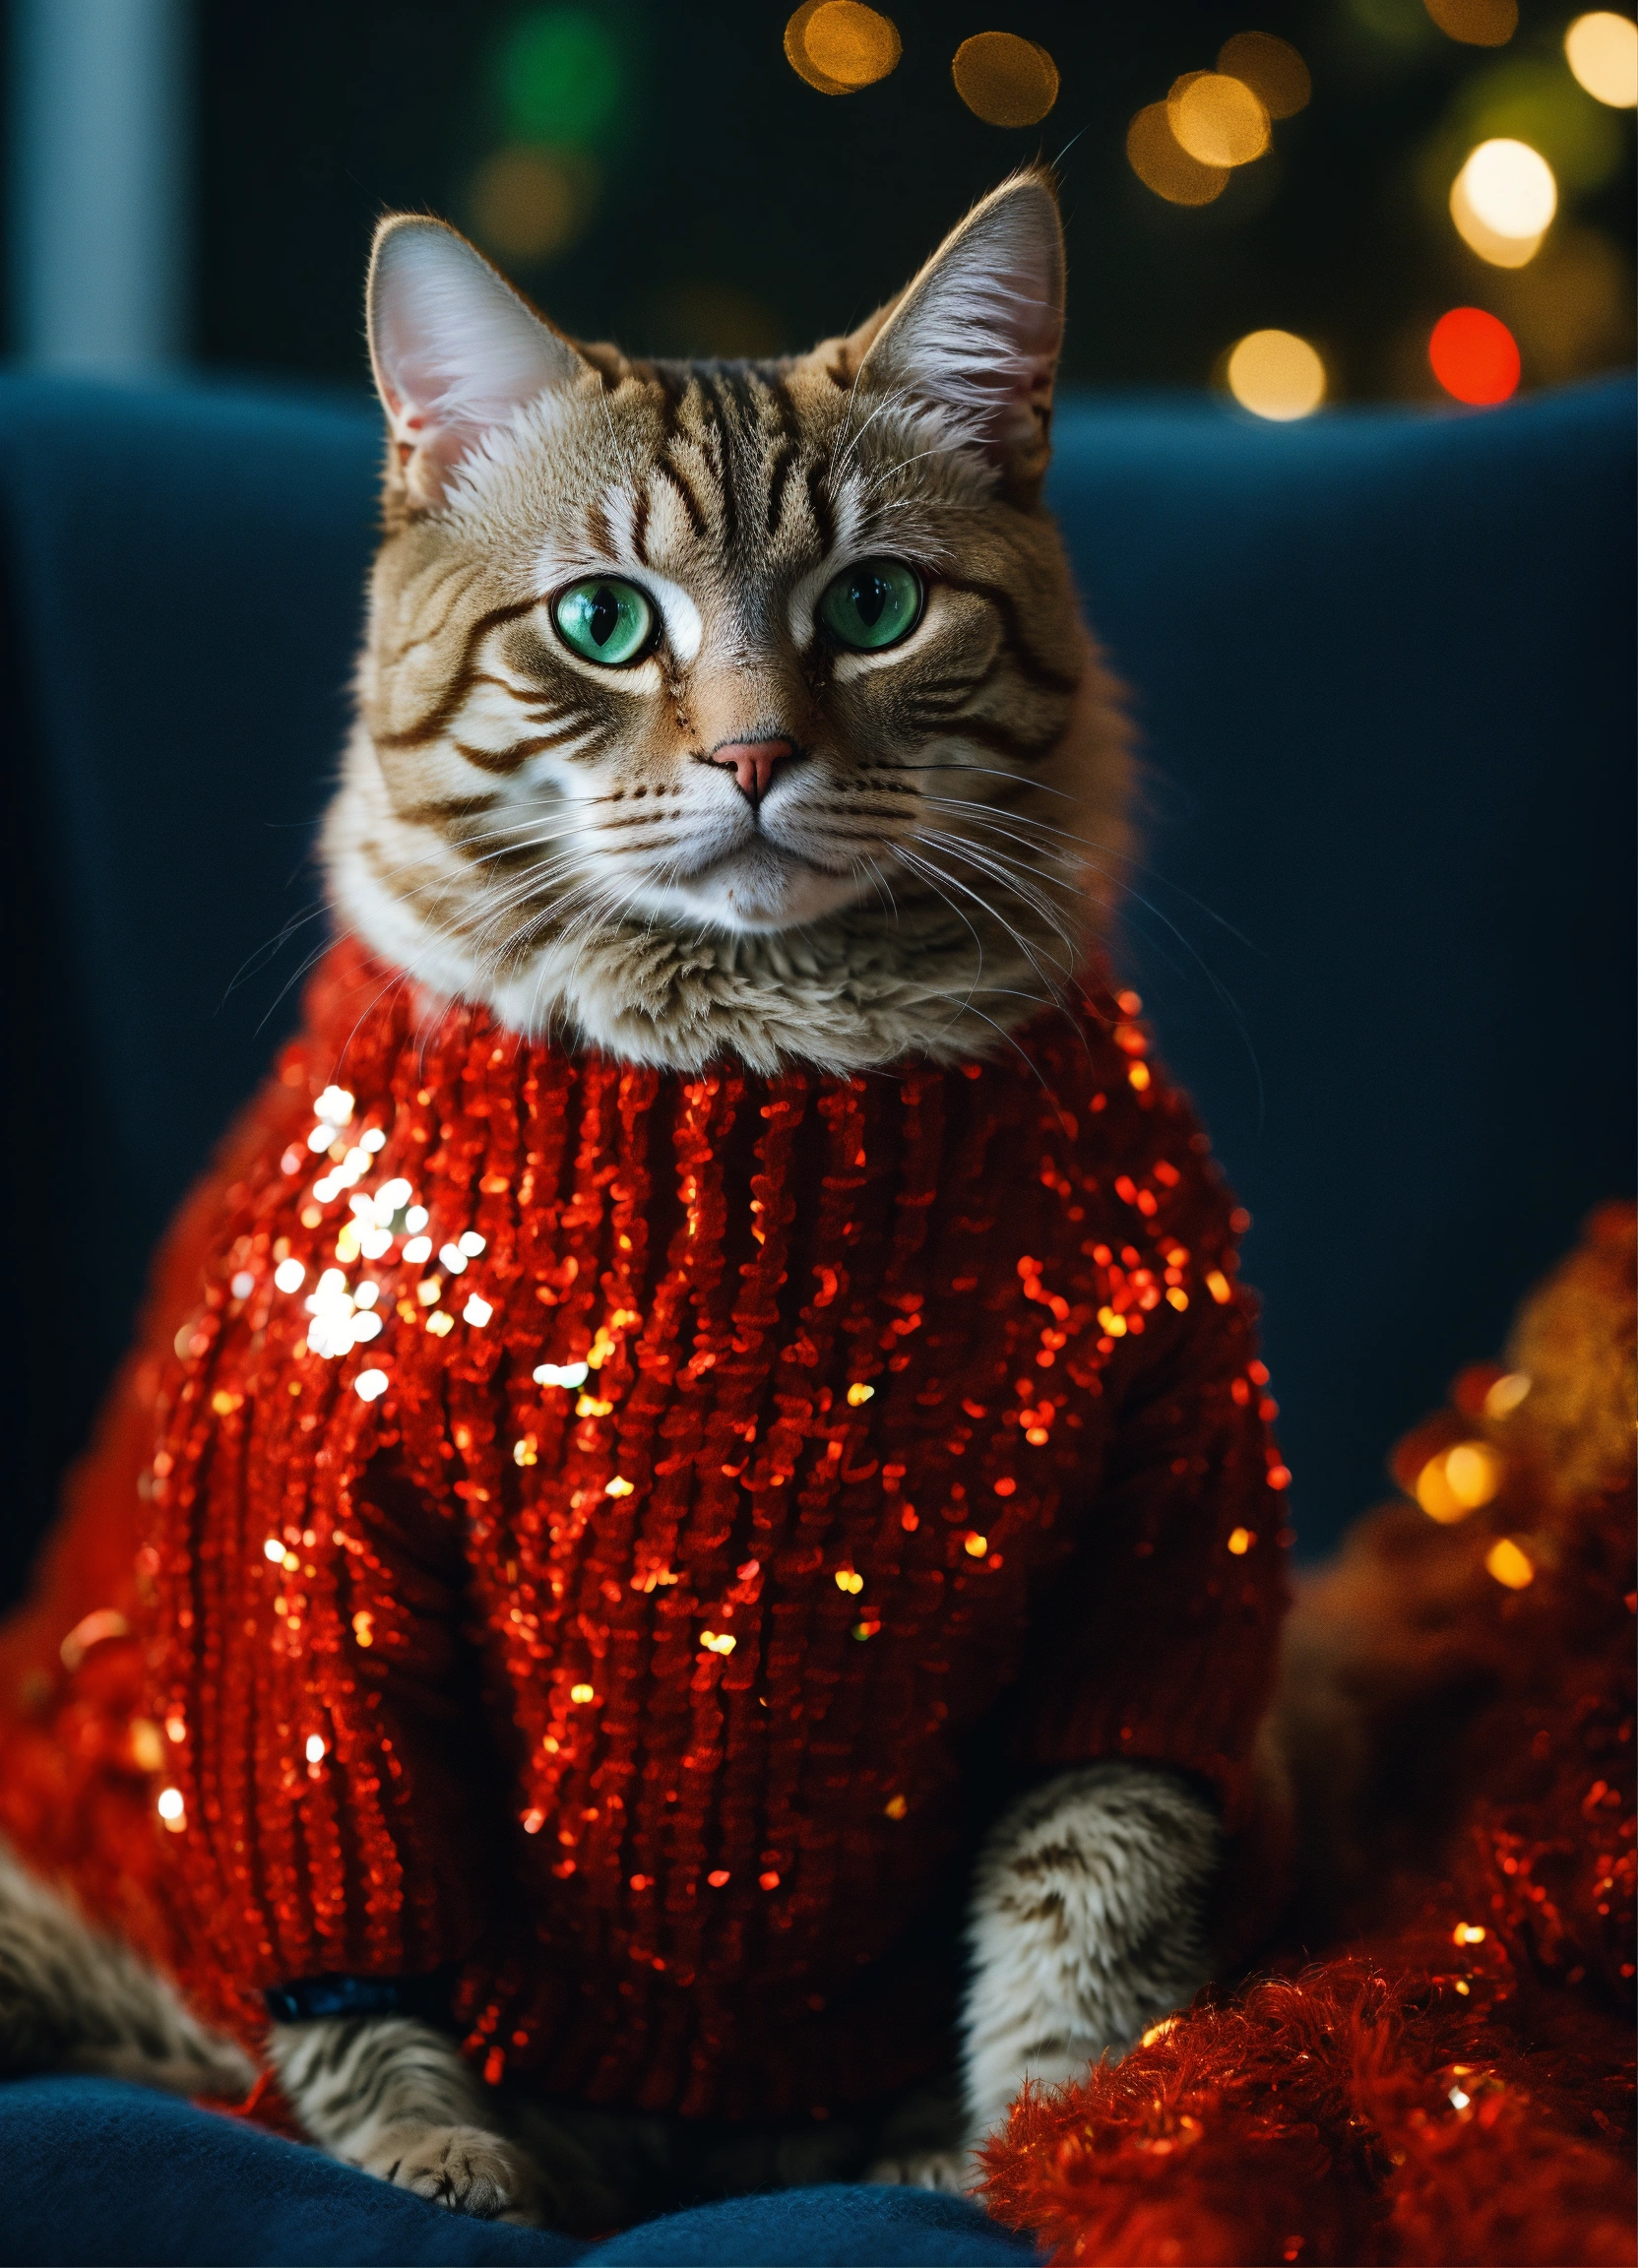 Lexica - Cat wearing wool sweater with sequins, 4k